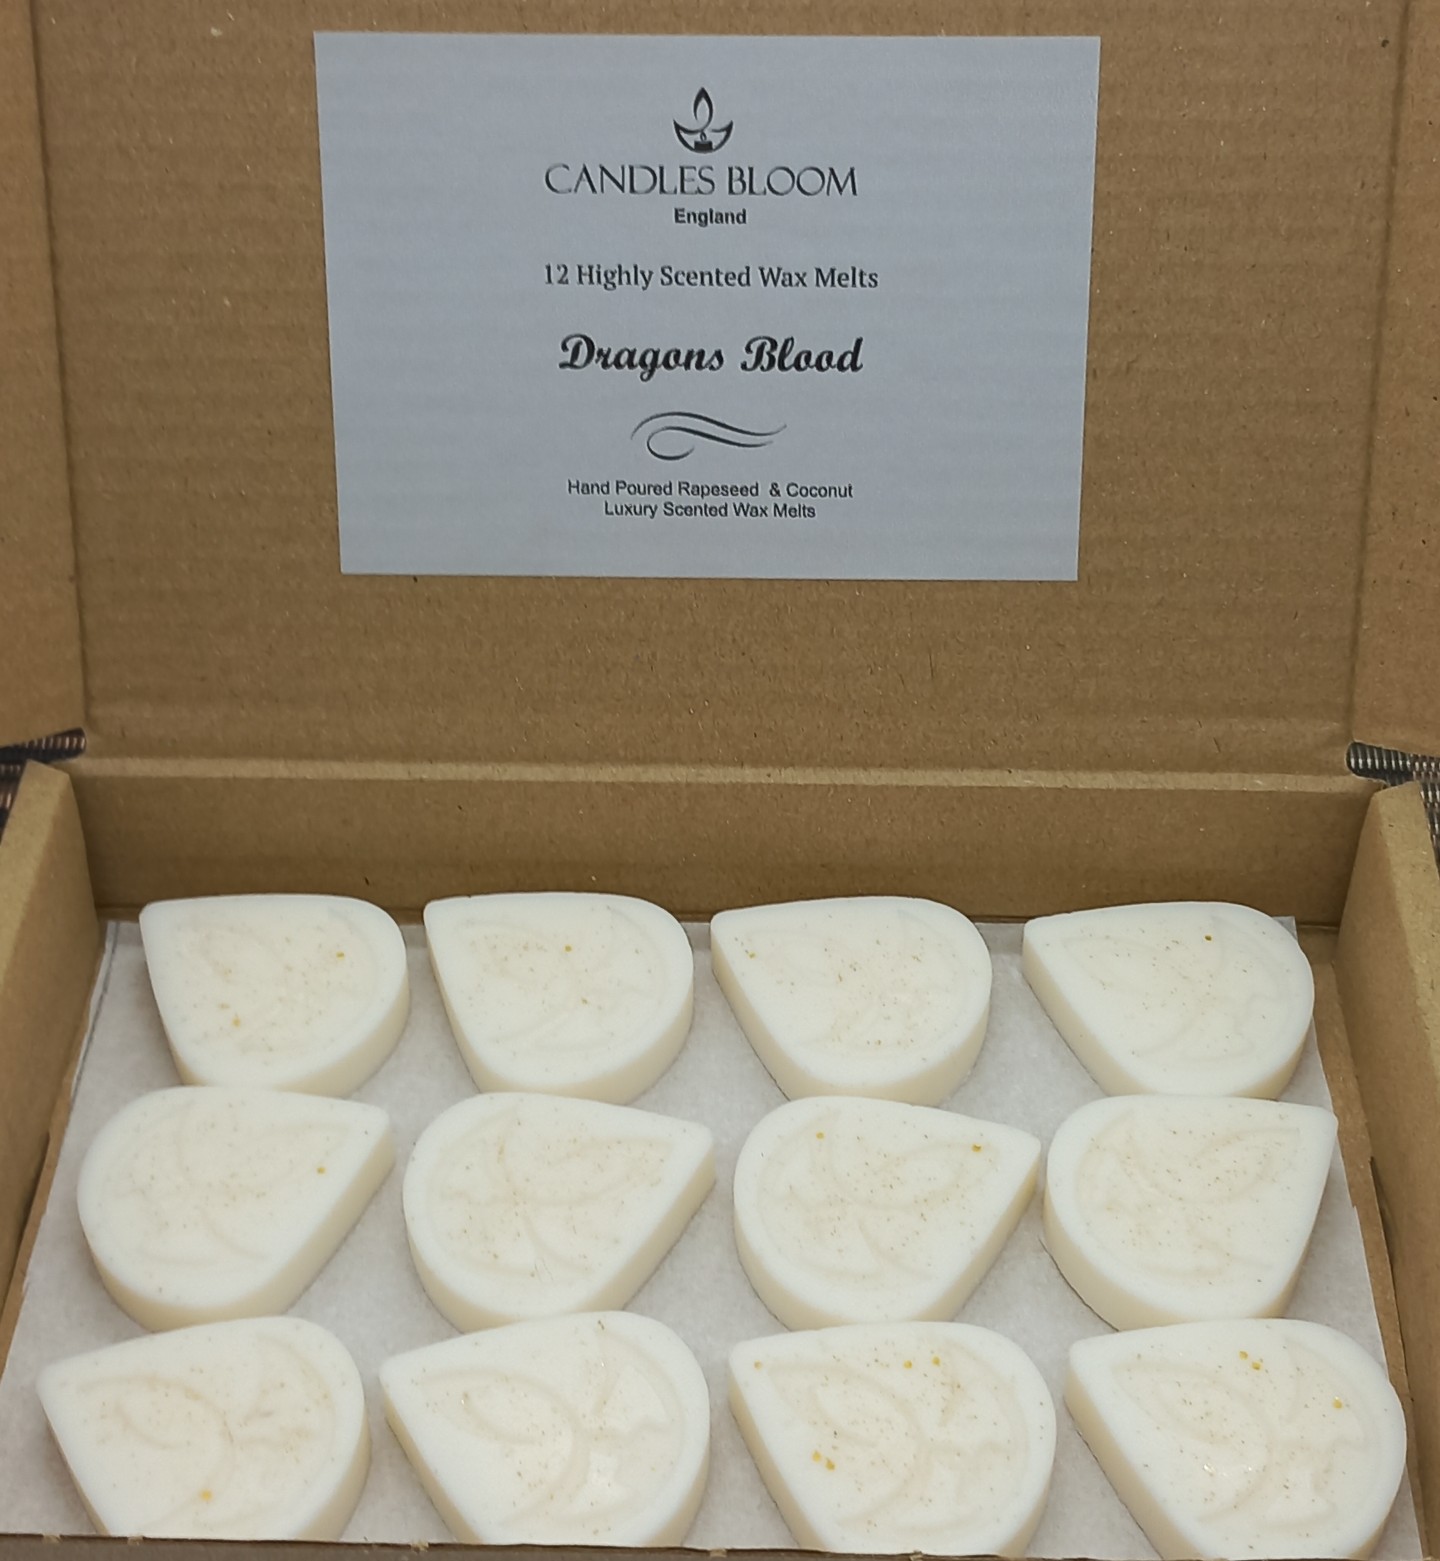 Dragons-Blood-Scented-Wax-Melts